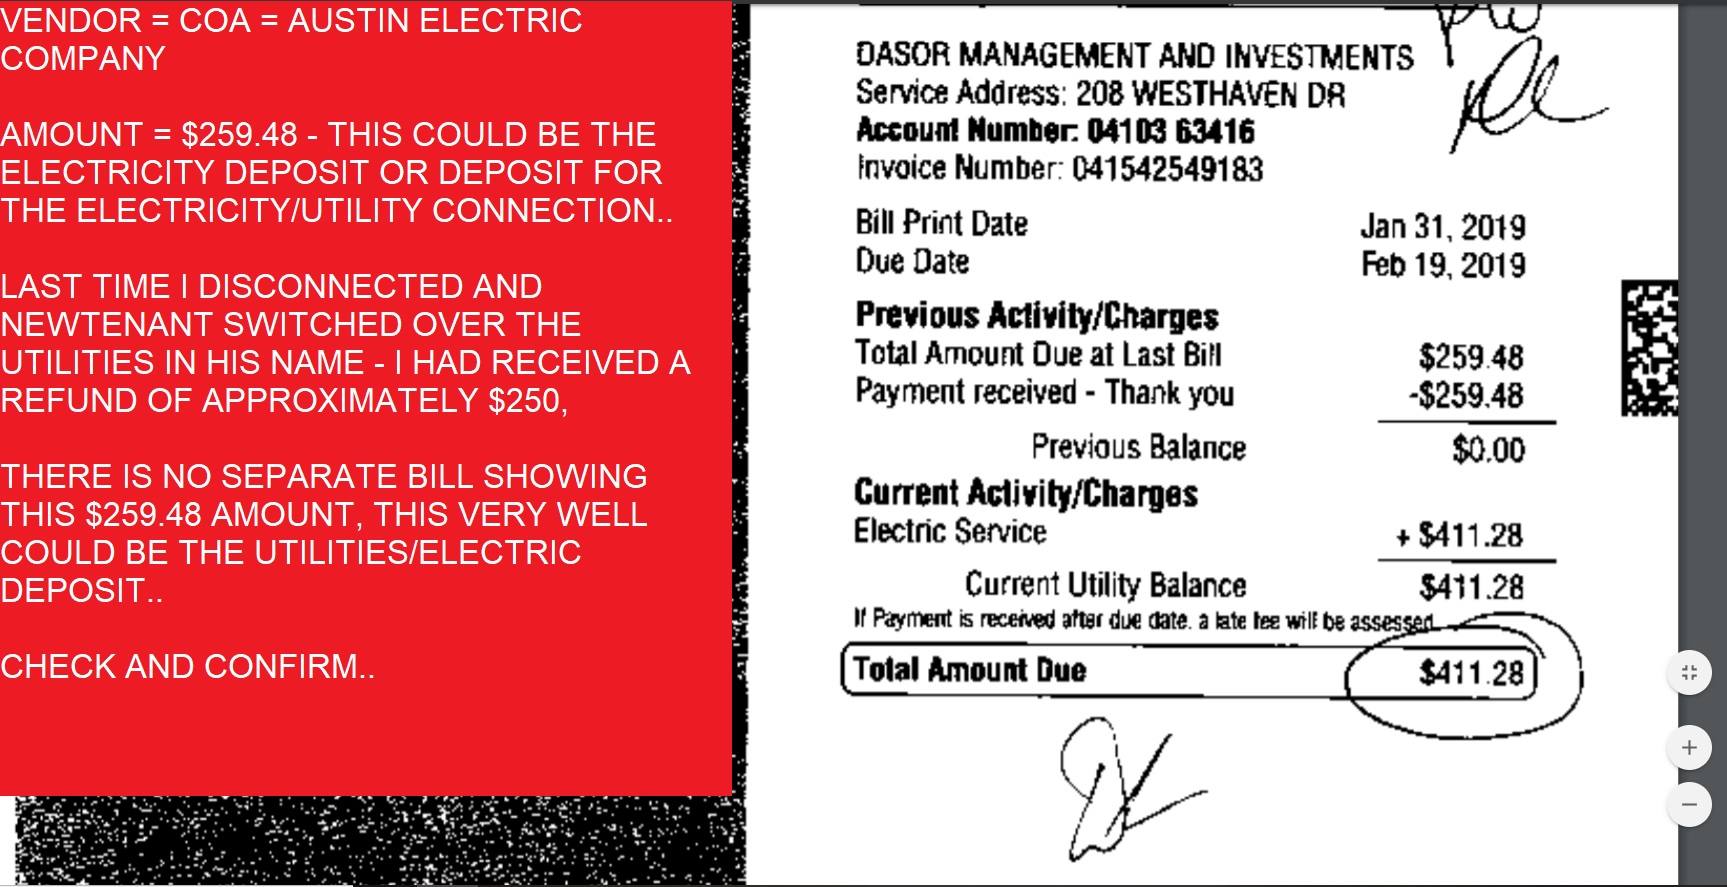 VENDOR = COA = AUSTIN ELECTRIC CO. AMOUNT = $259.48 THIS COULD BE THE REFUDABLE DEPOSIT FOR ELECTRICITY